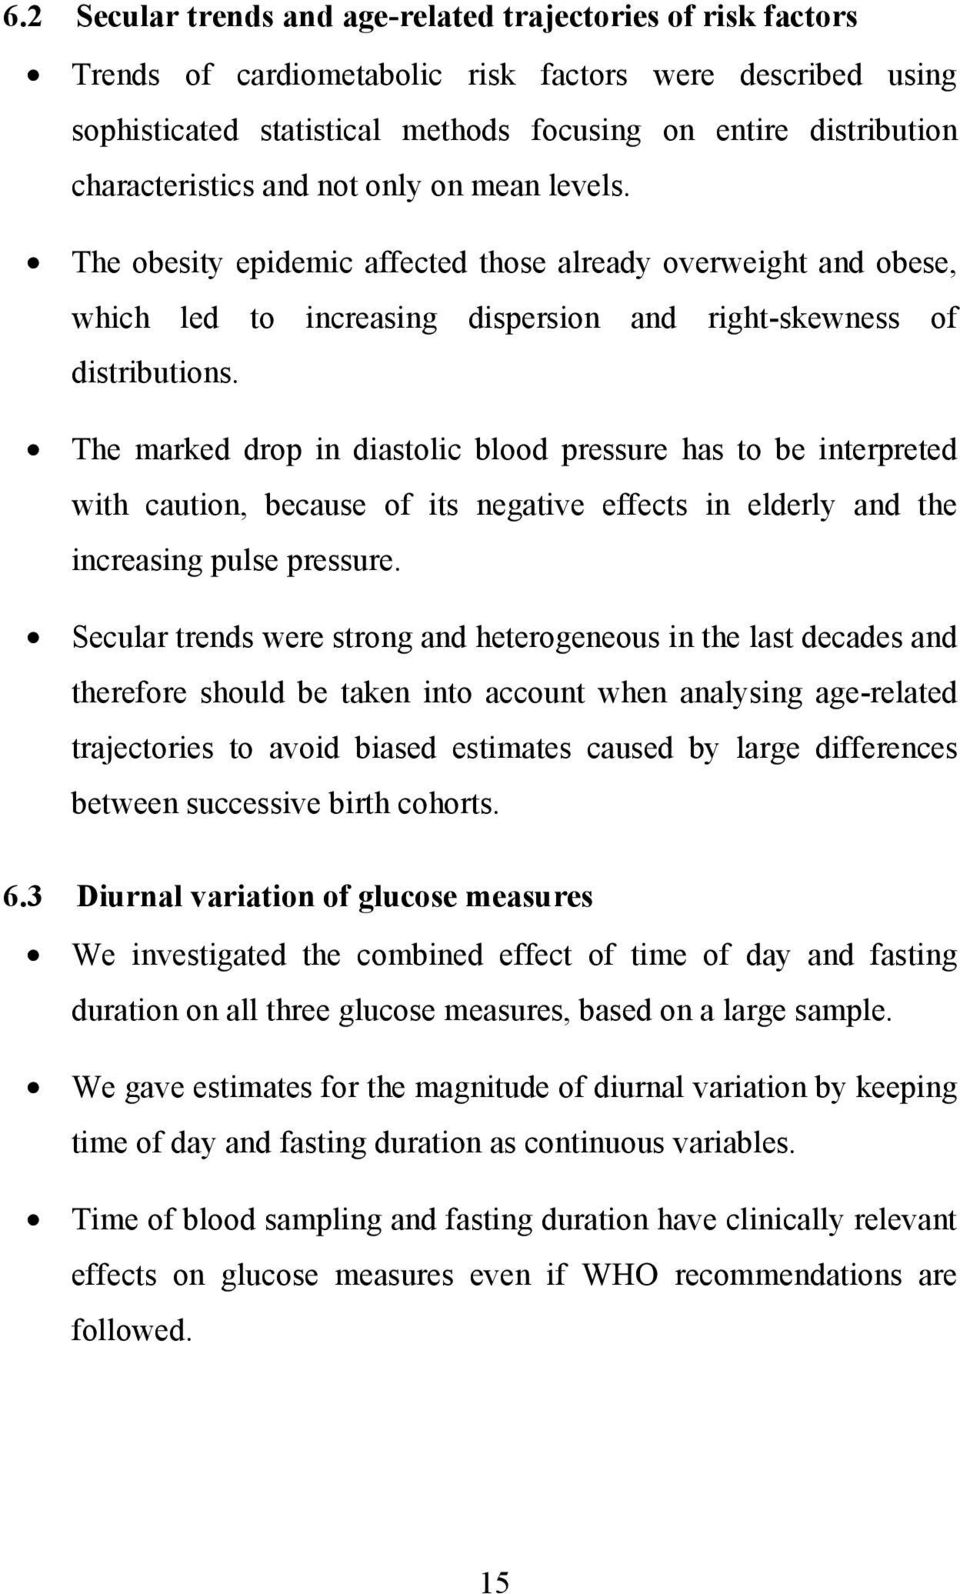 The marked drop in diastolic blood pressure has to be interpreted with caution, because of its negative effects in elderly and the increasing pulse pressure.